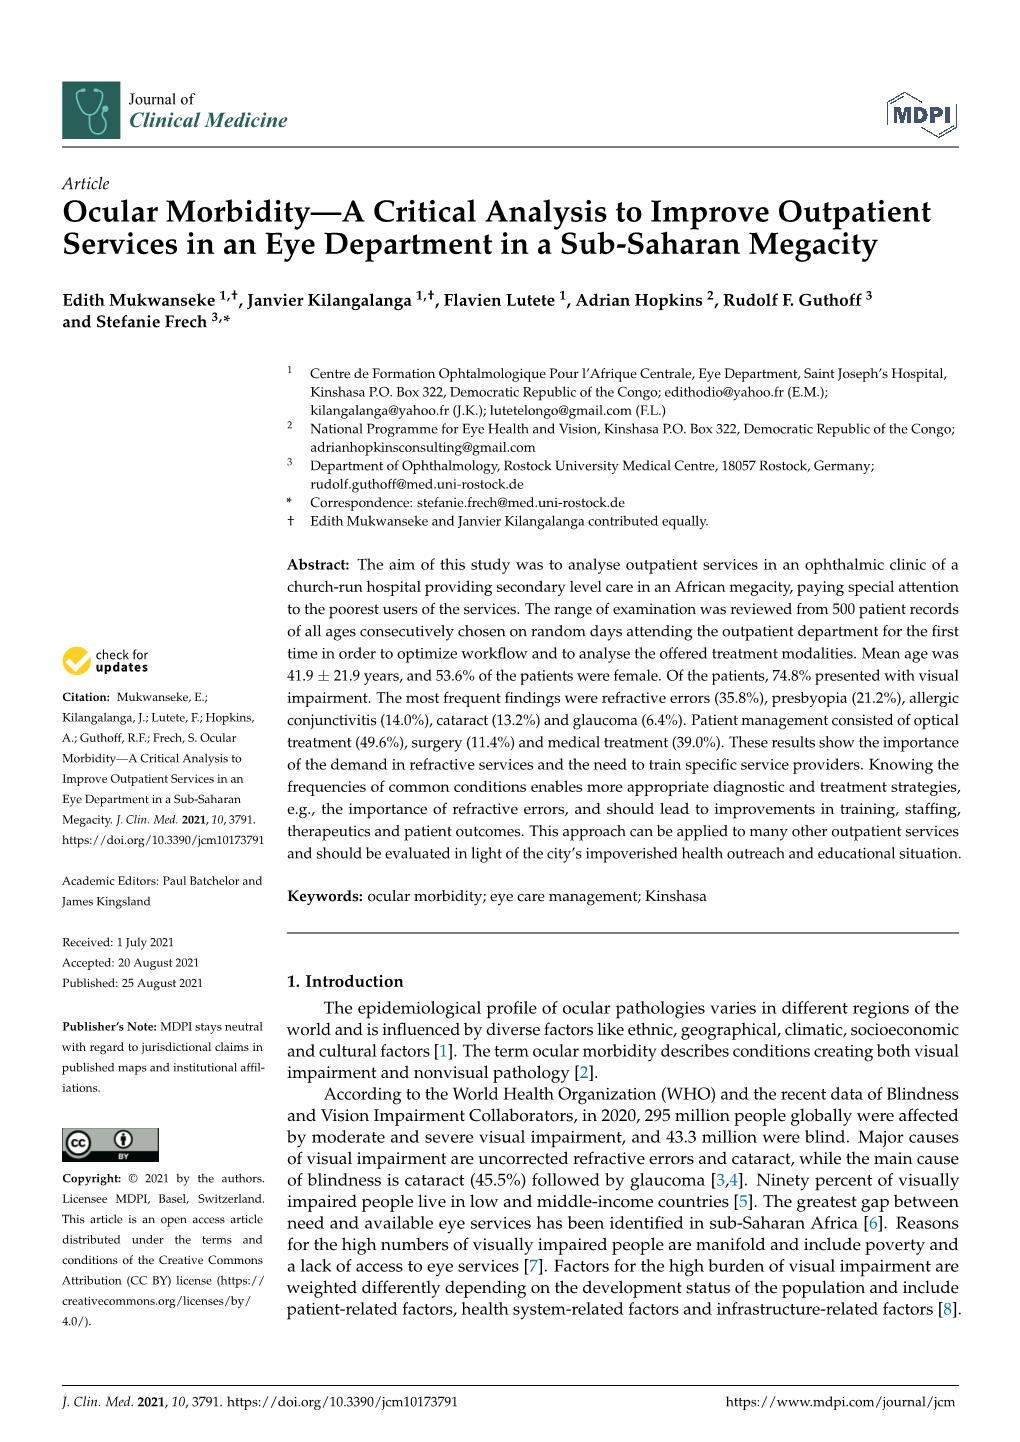 Ocular Morbidity—A Critical Analysis to Improve Outpatient Services in an Eye Department in a Sub-Saharan Megacity